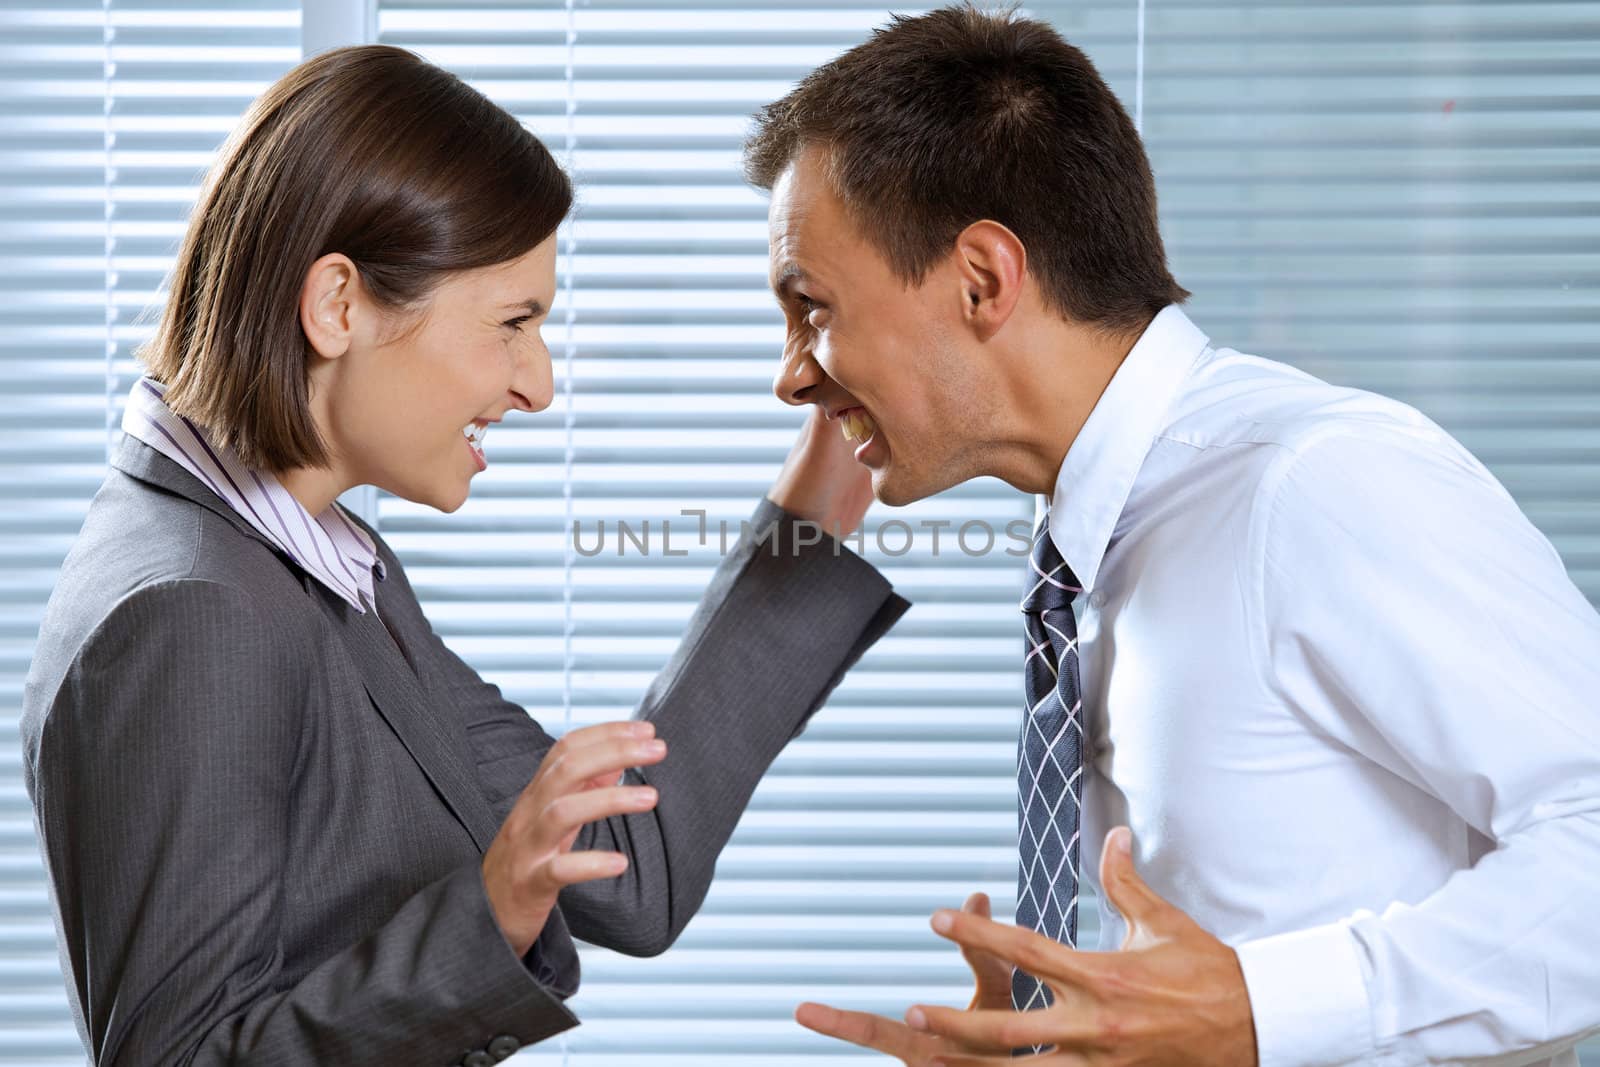 Smiling businessman and woman in office, looking at each other